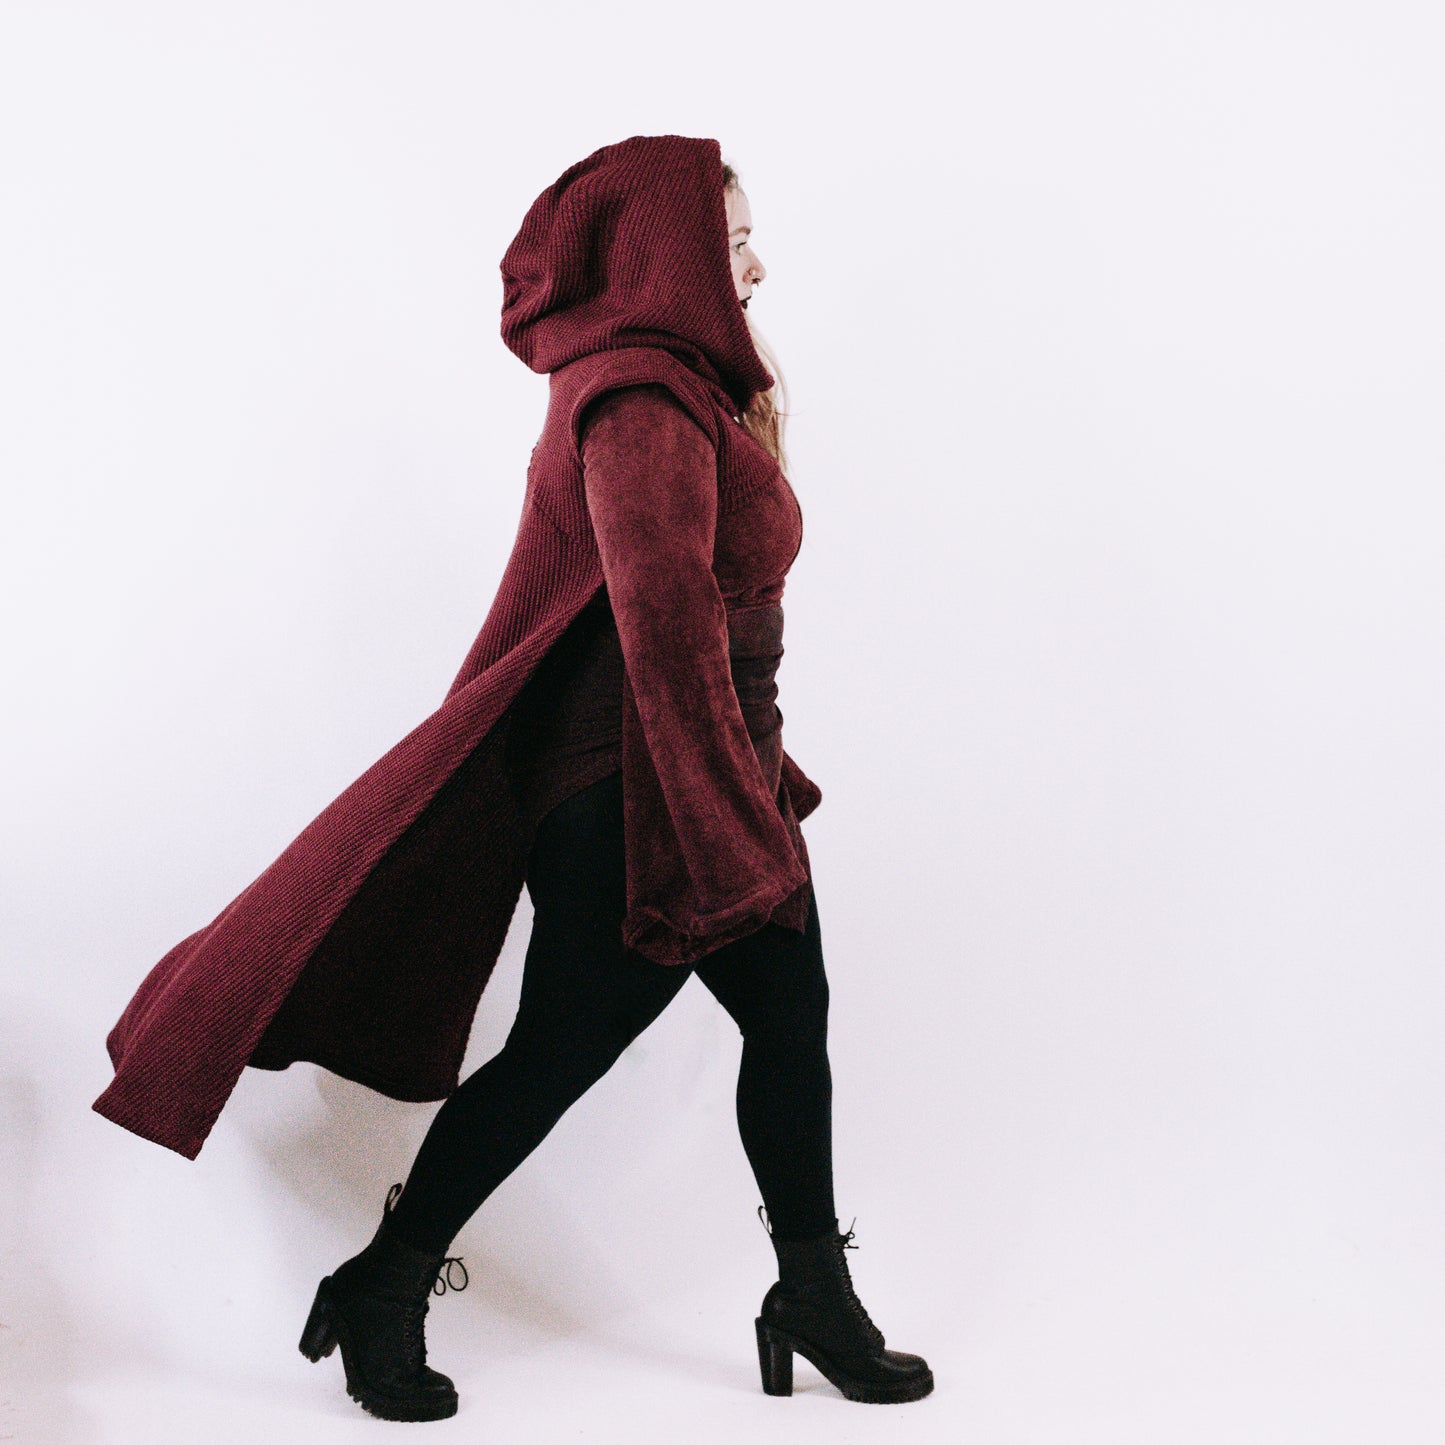 Vex Hooded Cape - blood moon (solid)